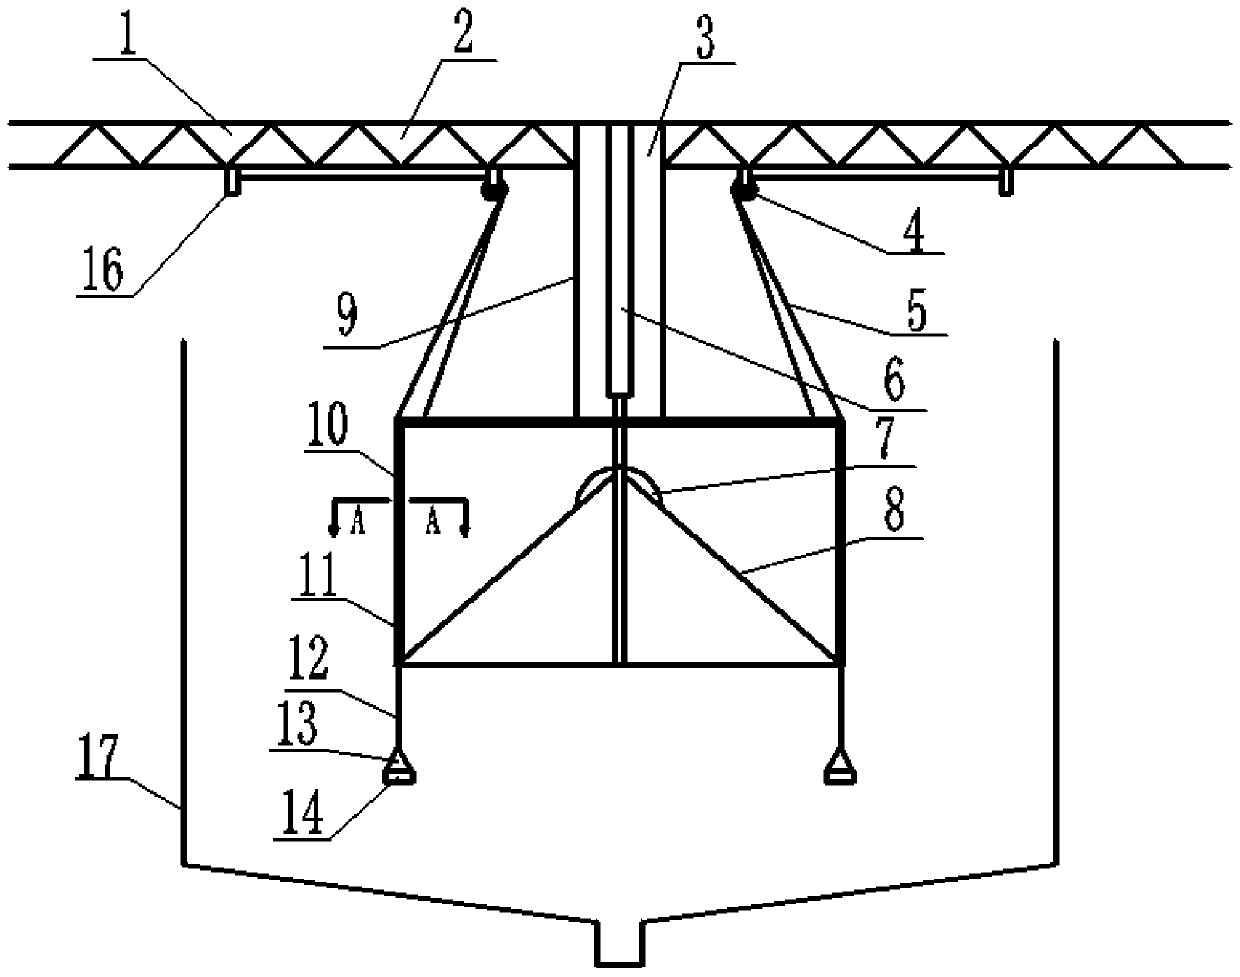 A material fall buffer device